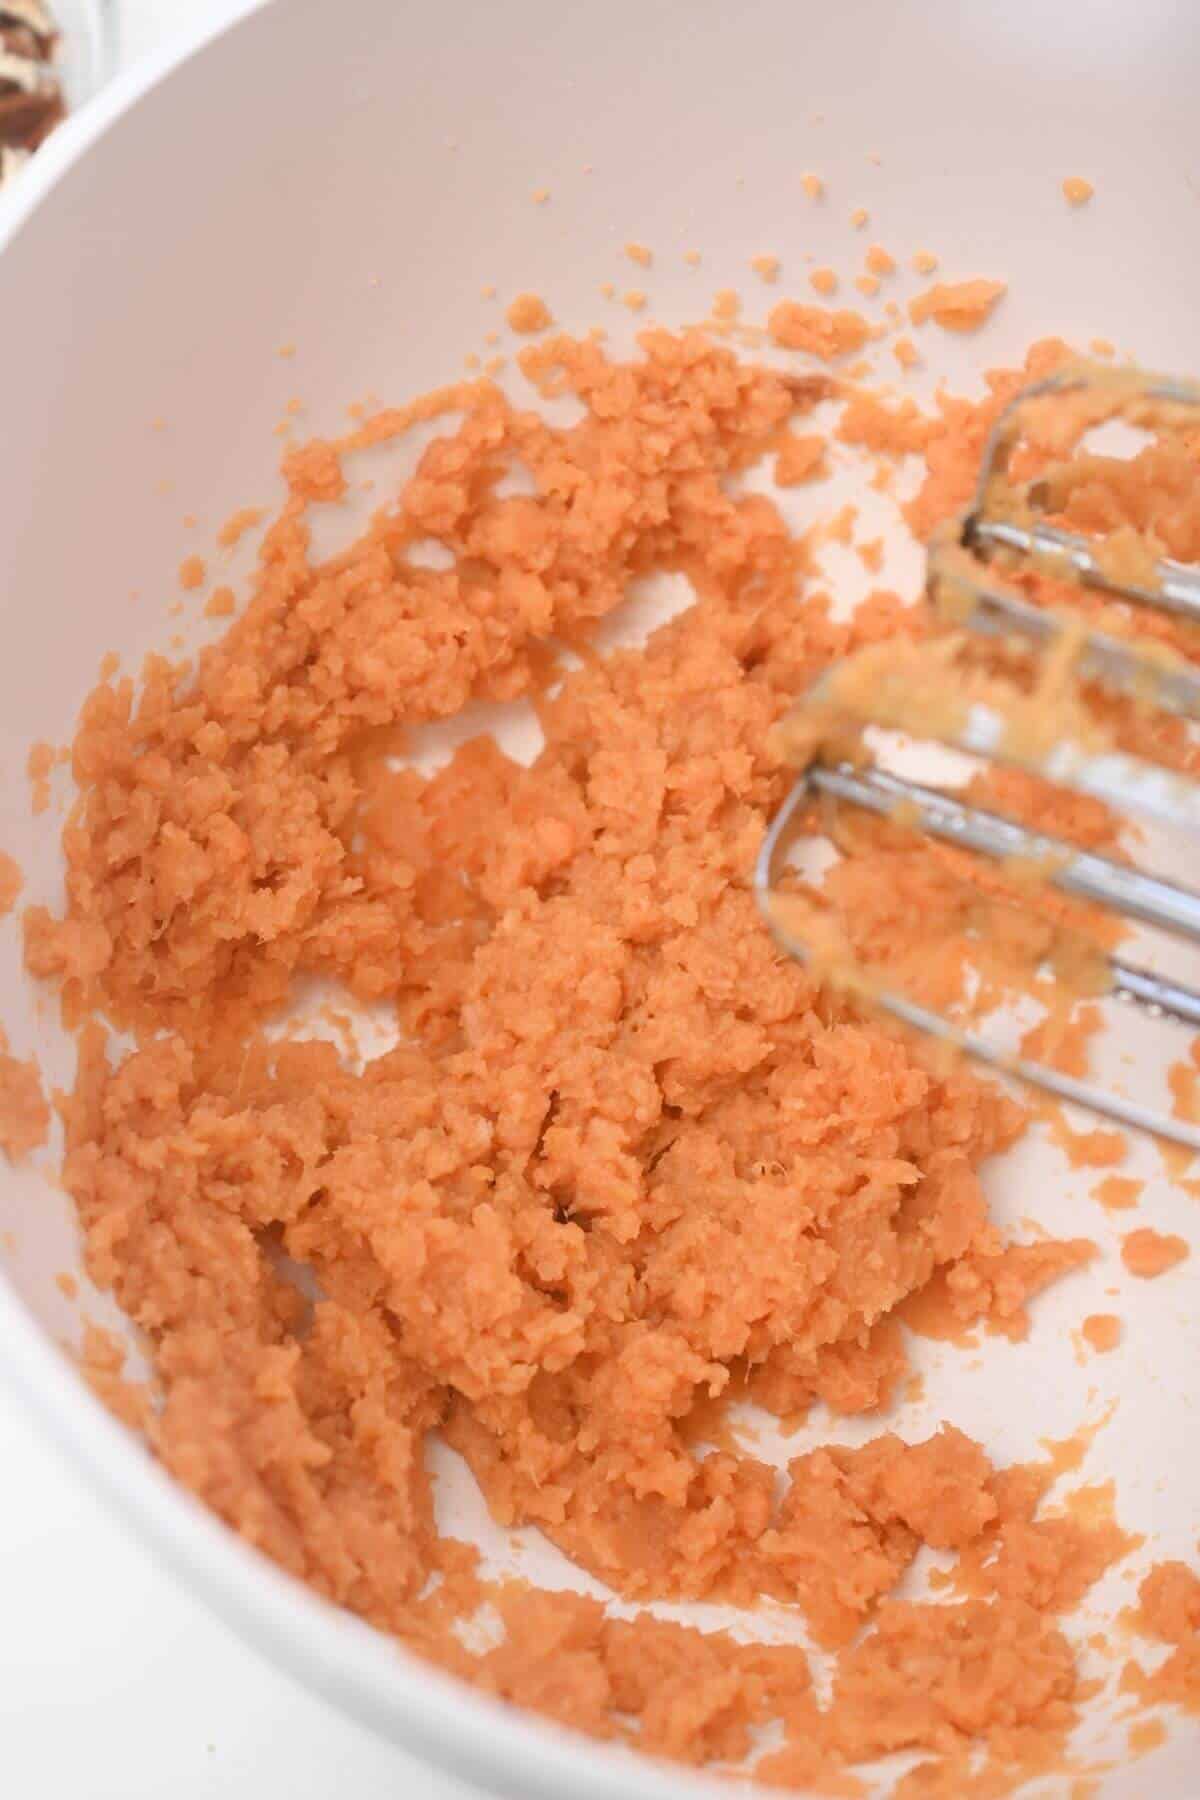 Beaten canned yams in a bowl with a whisk.